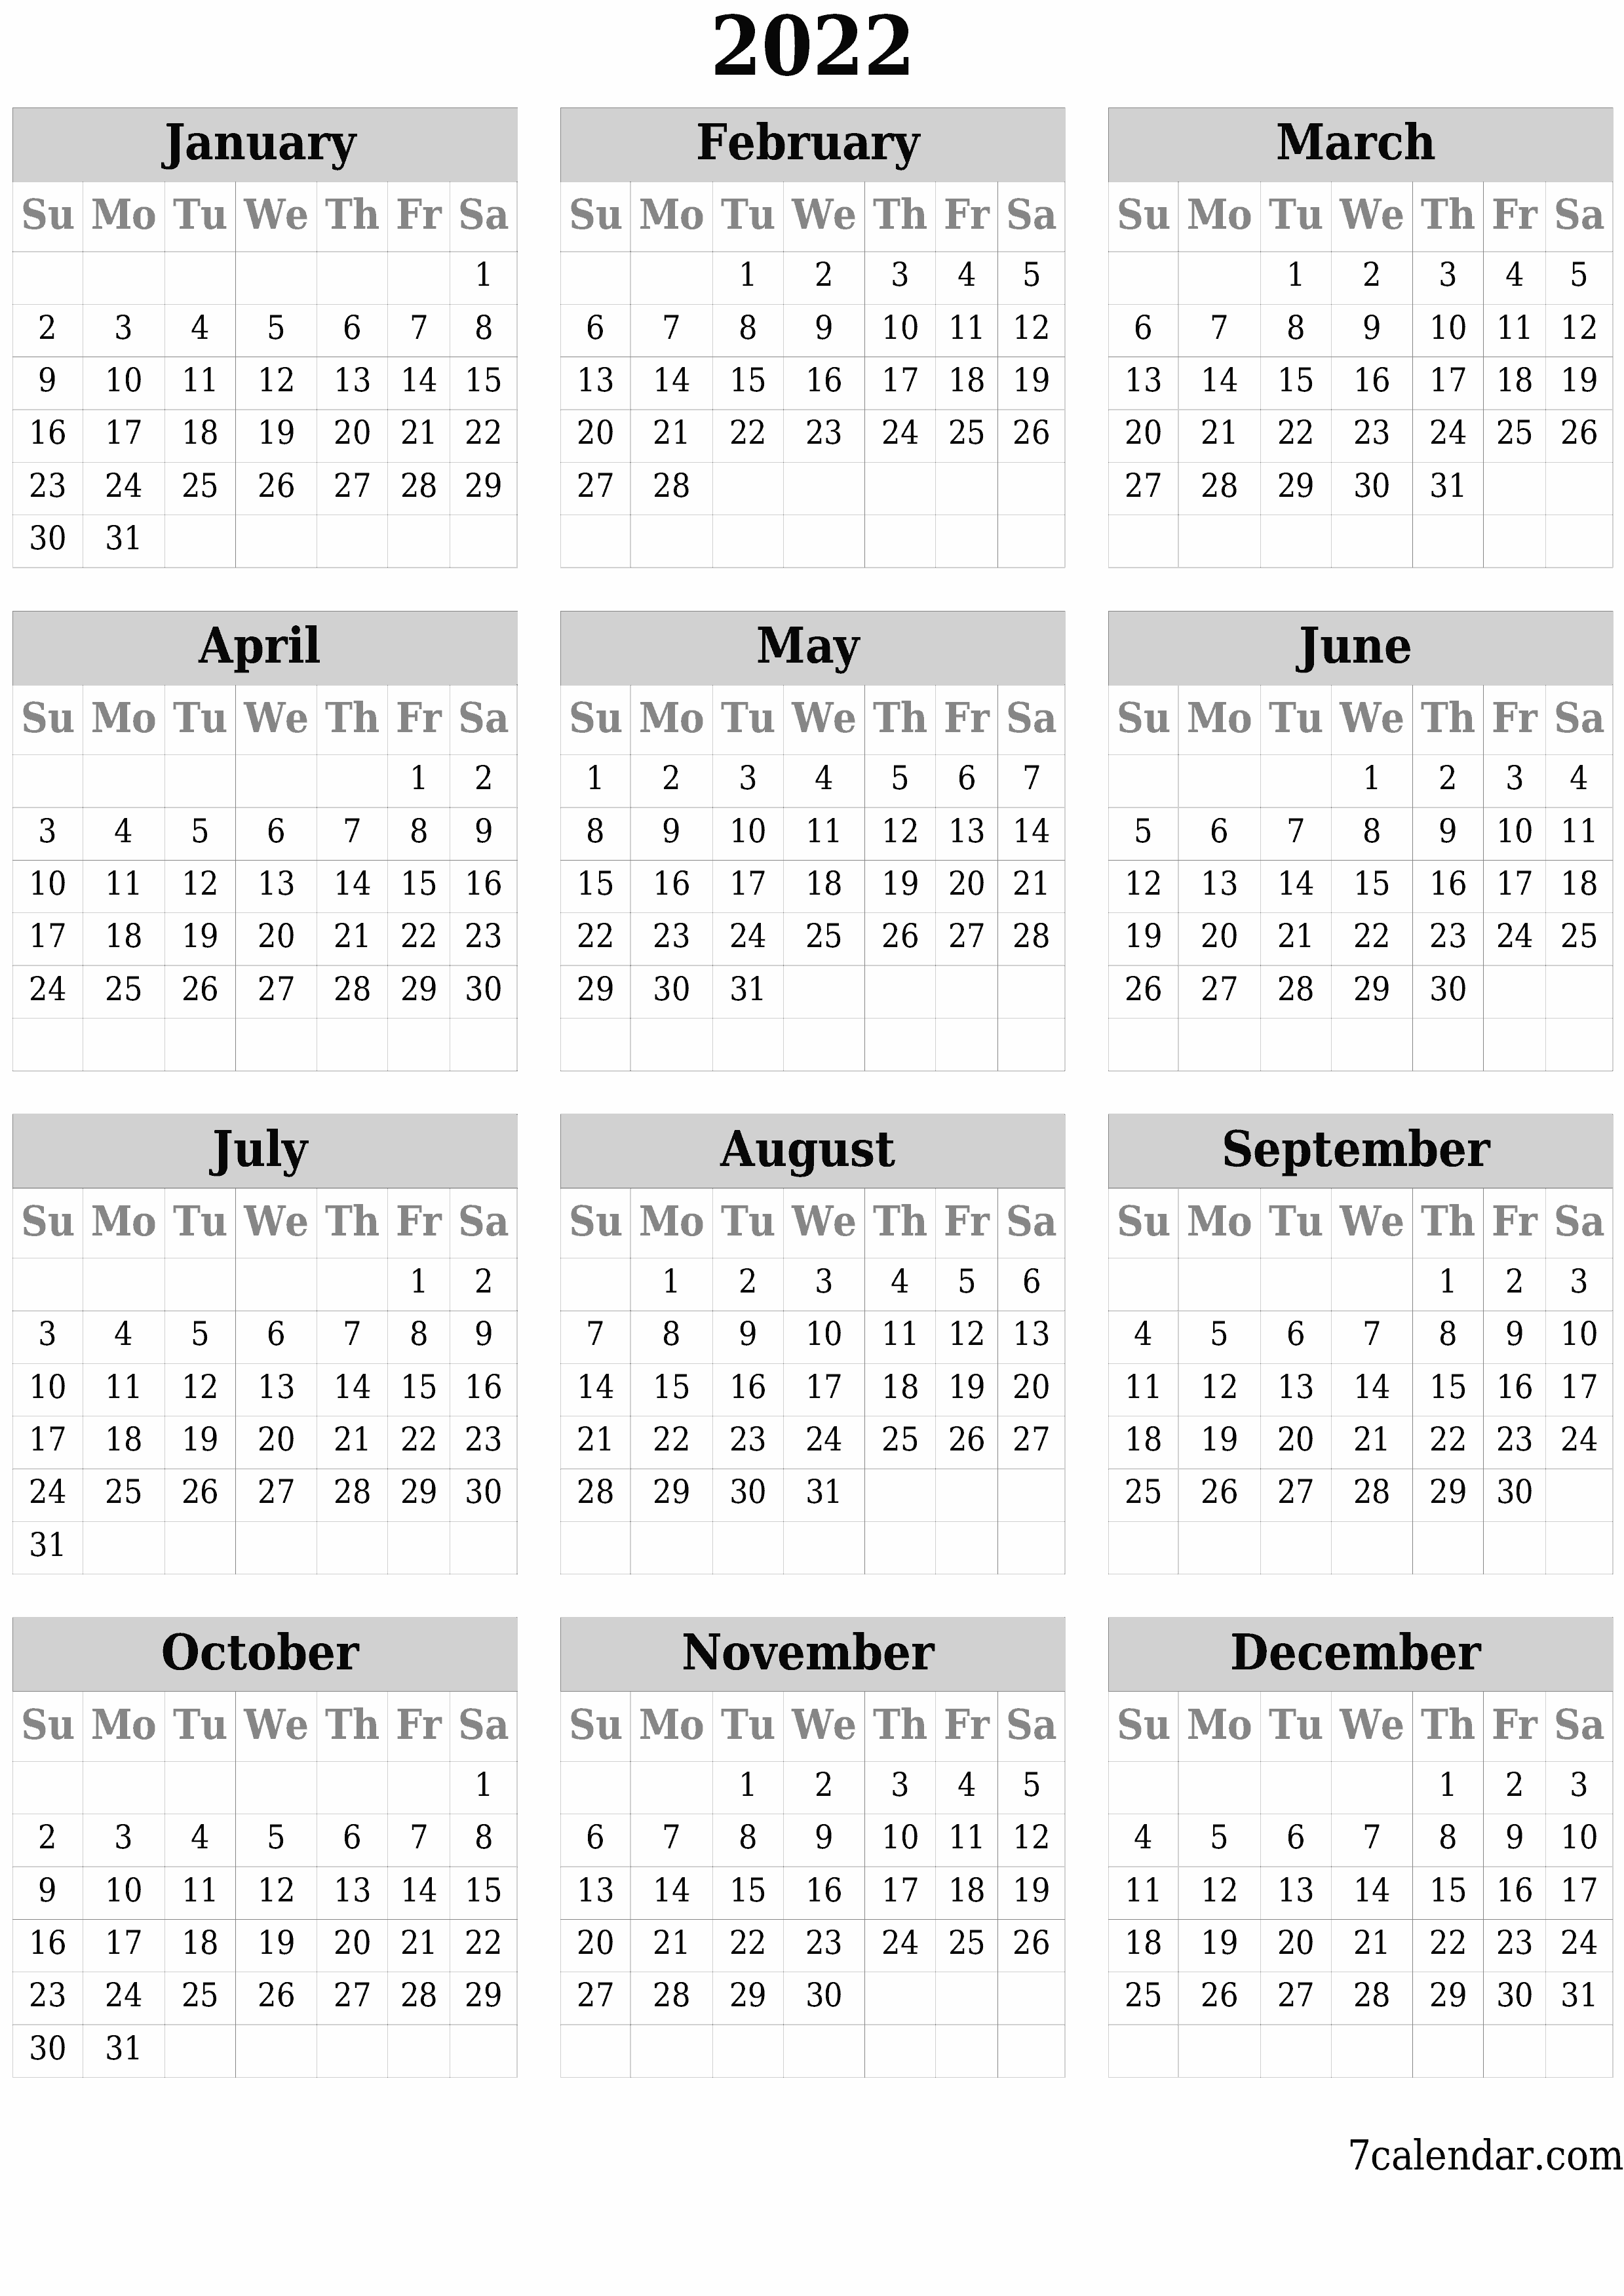 Blank yearly printable calendar and planner for the year 2022 with notes, save and print to PDF PNG English - 7calendar.com